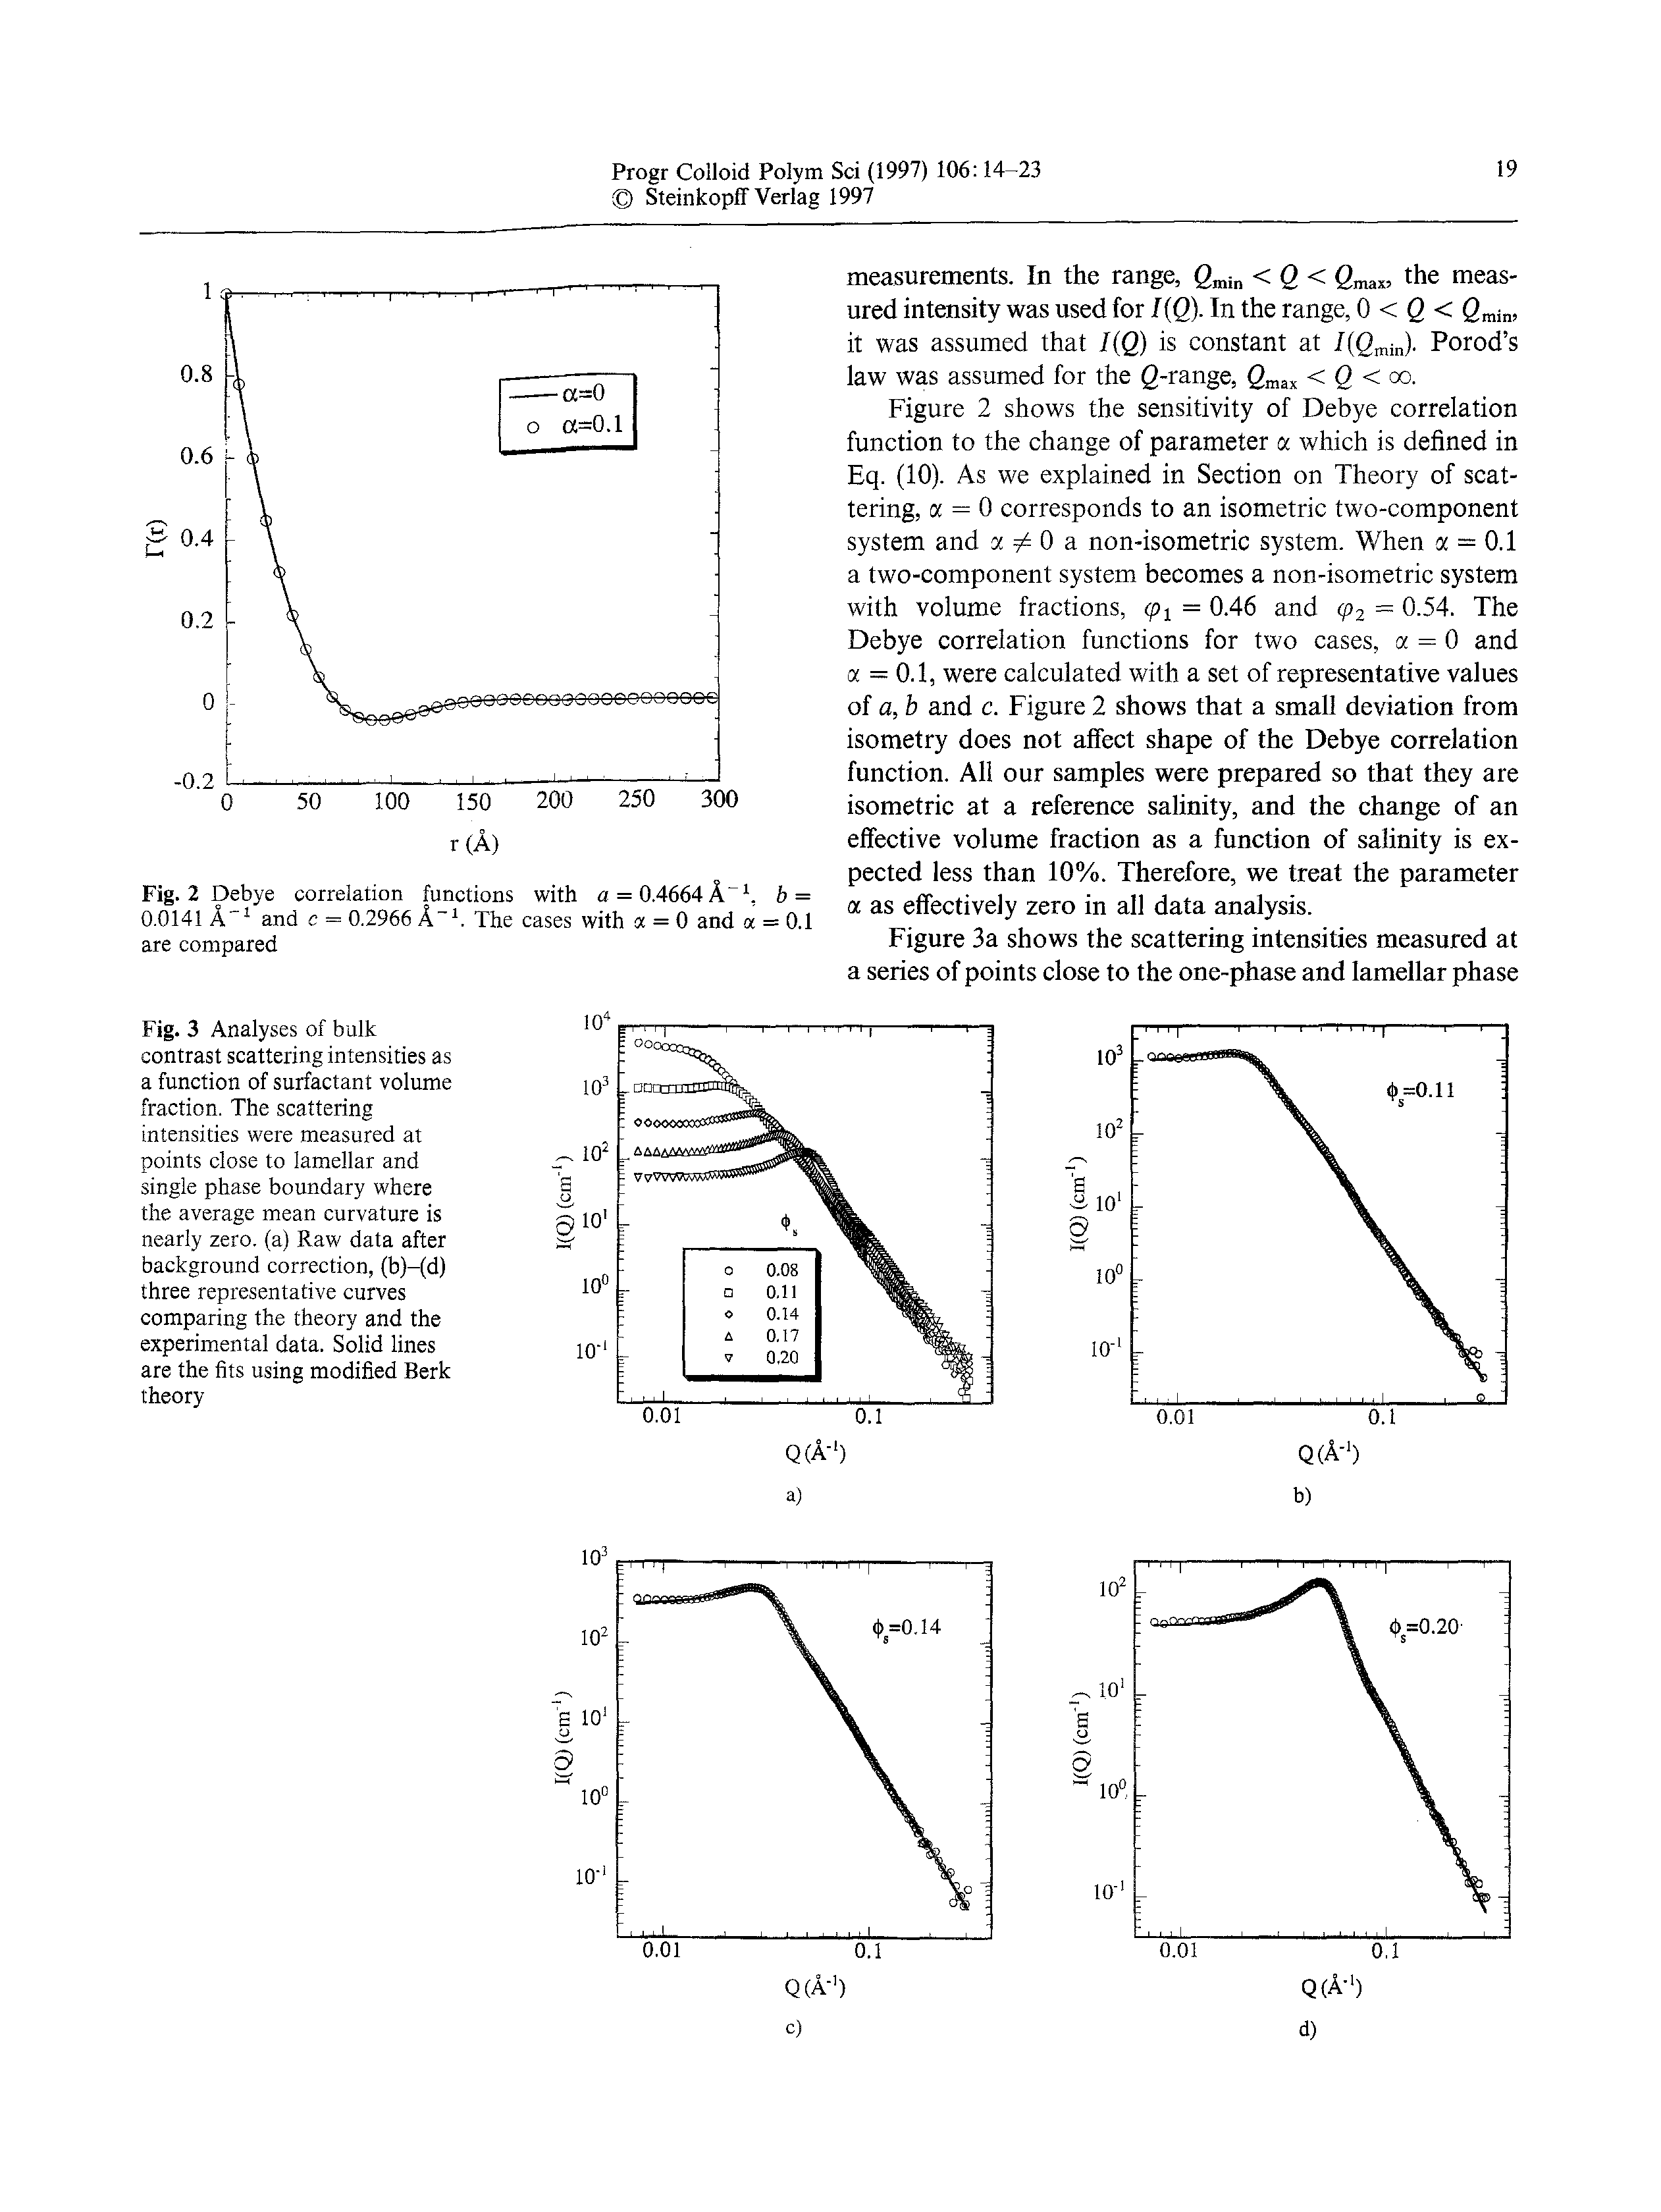 Fig. 3 Analyses of bulk contrast scattering intensities as a function of surfactant volume fraction. The scattering intensities were measured at points close to lamellar and single phase boundary where the average mean curvature is nearly zero, (a) Raw data after background correction, (b)-(d) three representative curves comparing the theory and the experimental data. Solid lines are the fits using modified Berk theory...